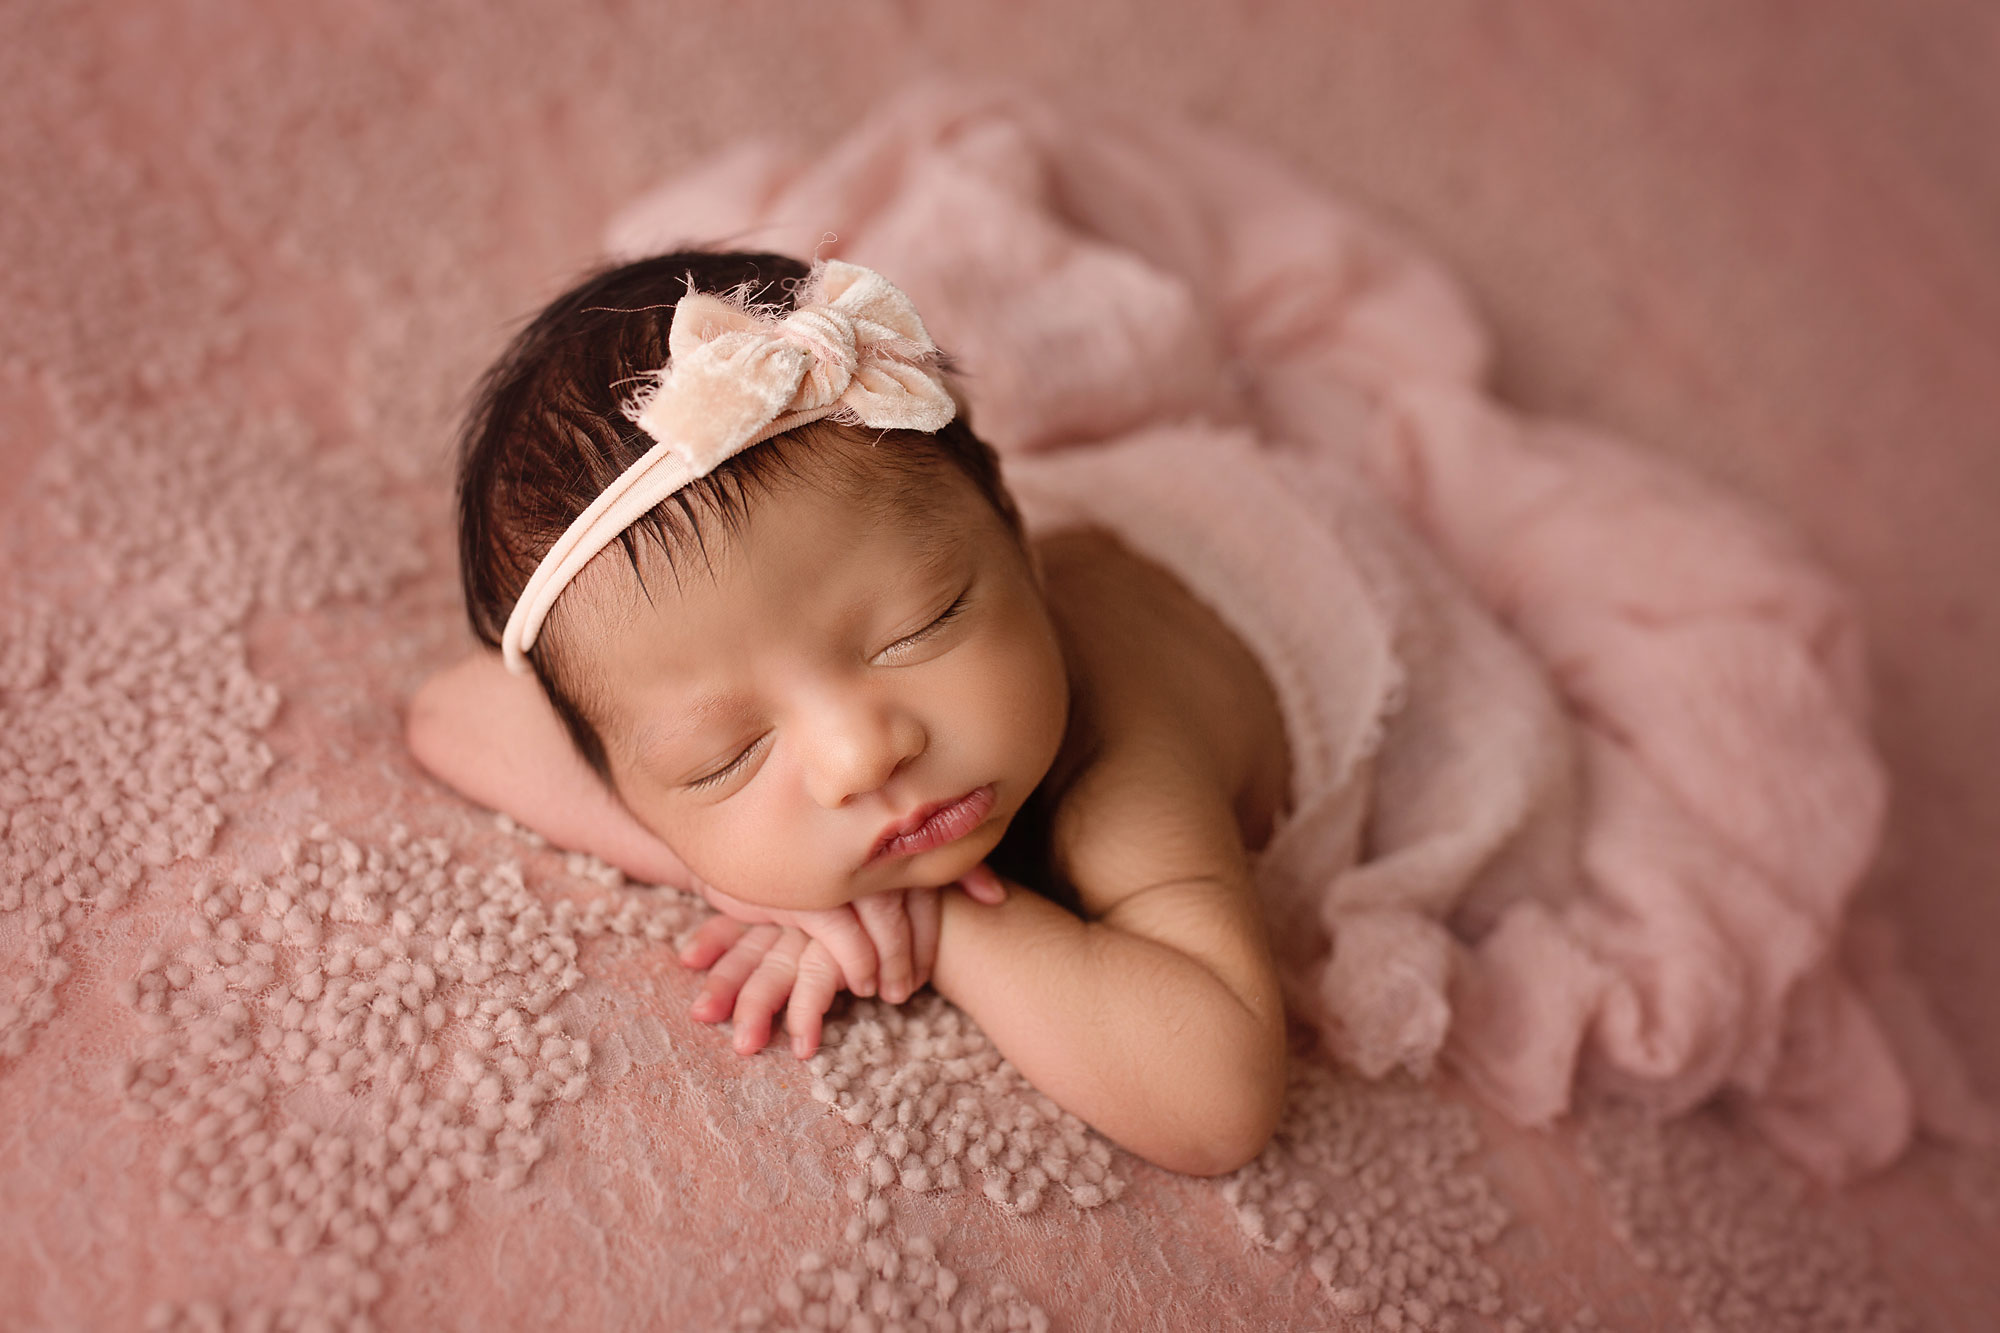 middlesex county newborn photography, baby girl wrapped in pink blanket with bow in hair sleeping on textured pink beanbag